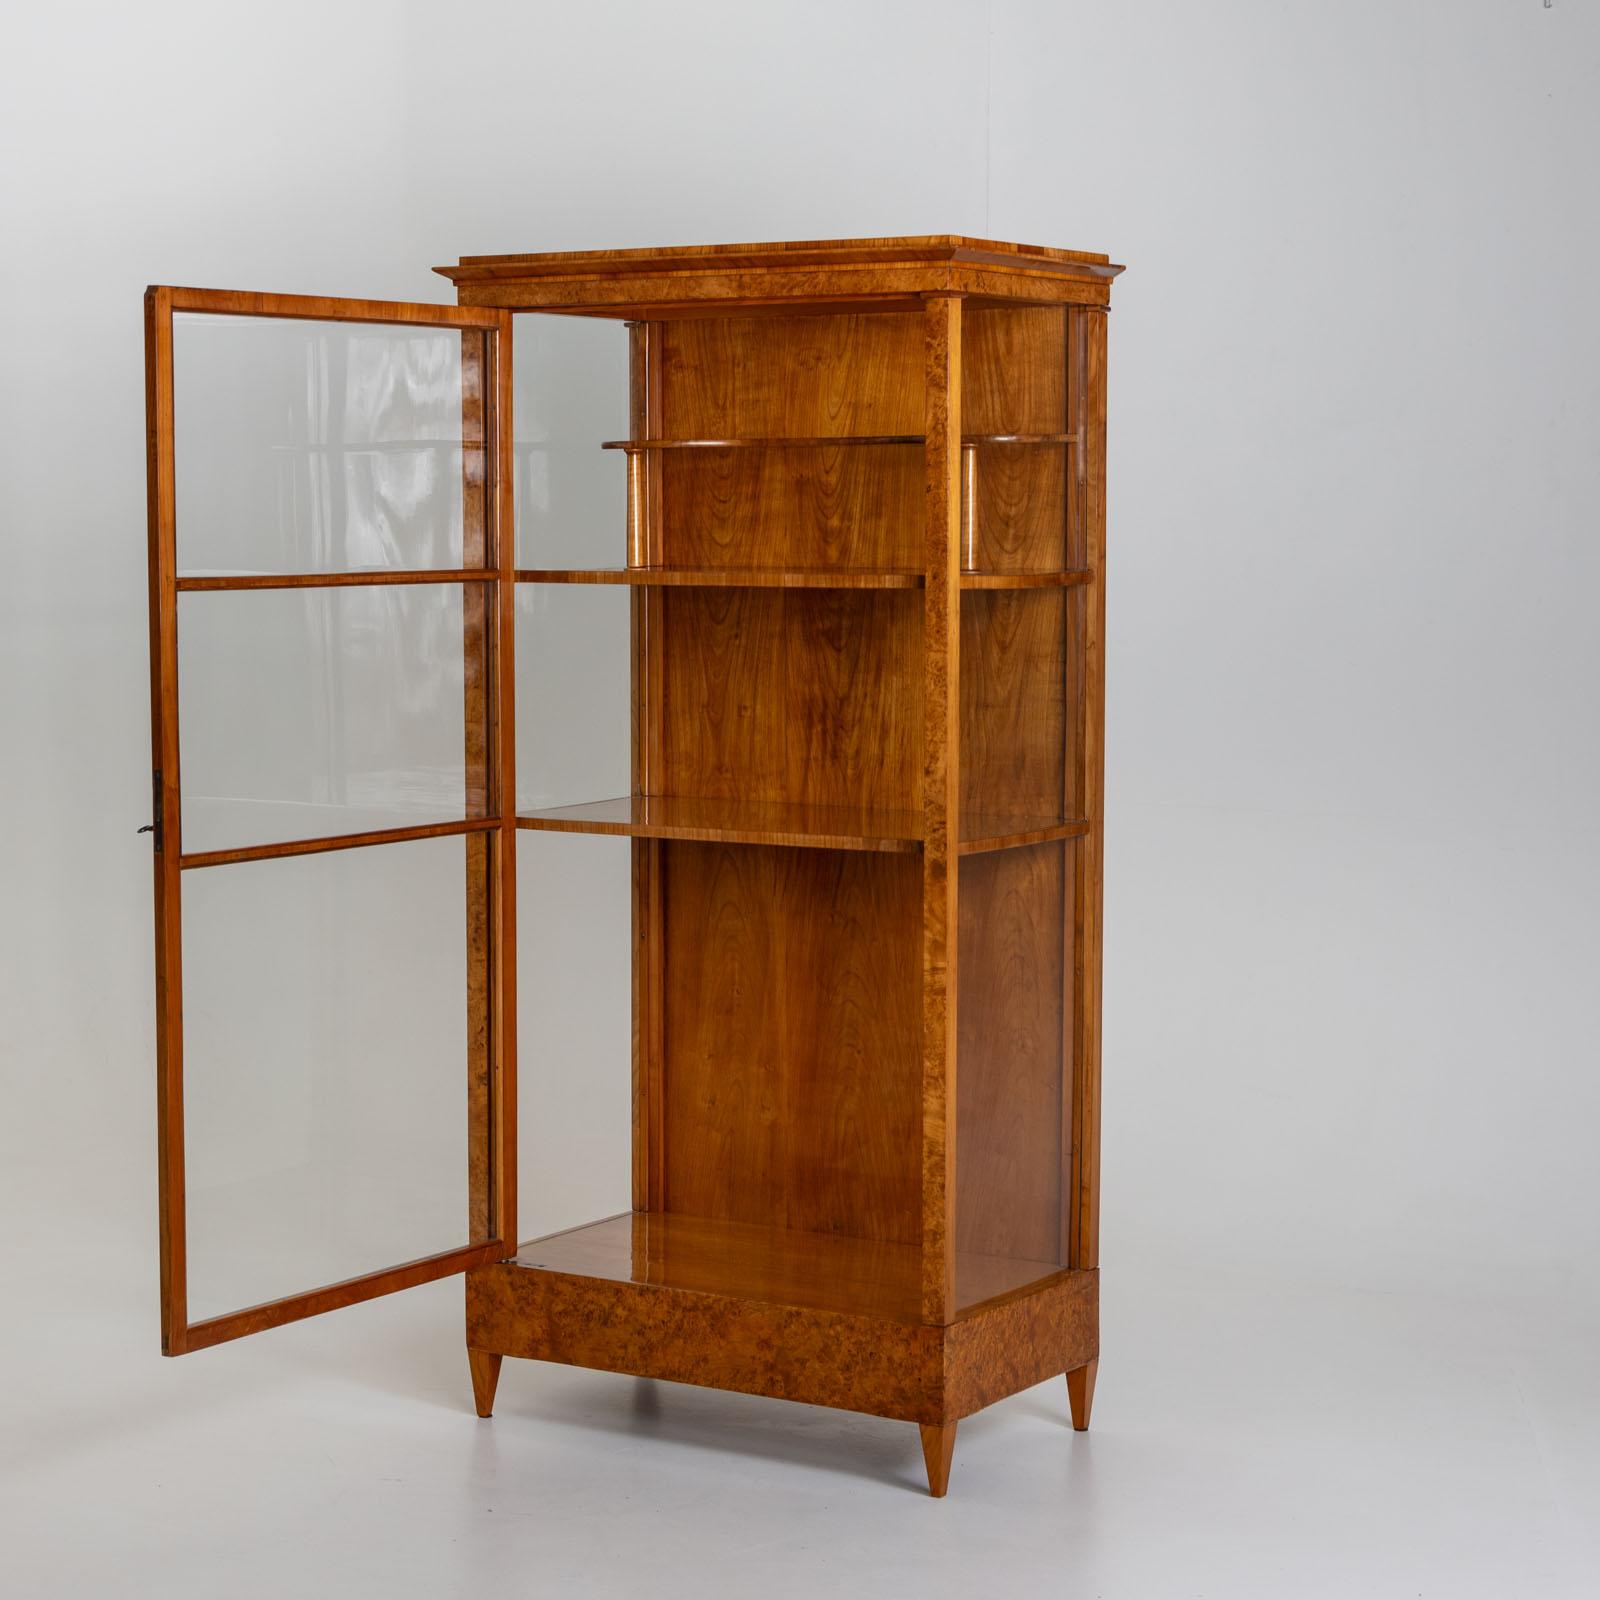 Single-door Biedermeier display cabinet with a three-sided glazed front and two shelves as well as a small curved shelf supported by small columns. The display cabinet is veneered in thuja root and cherry. It has been restored and polished by hand.